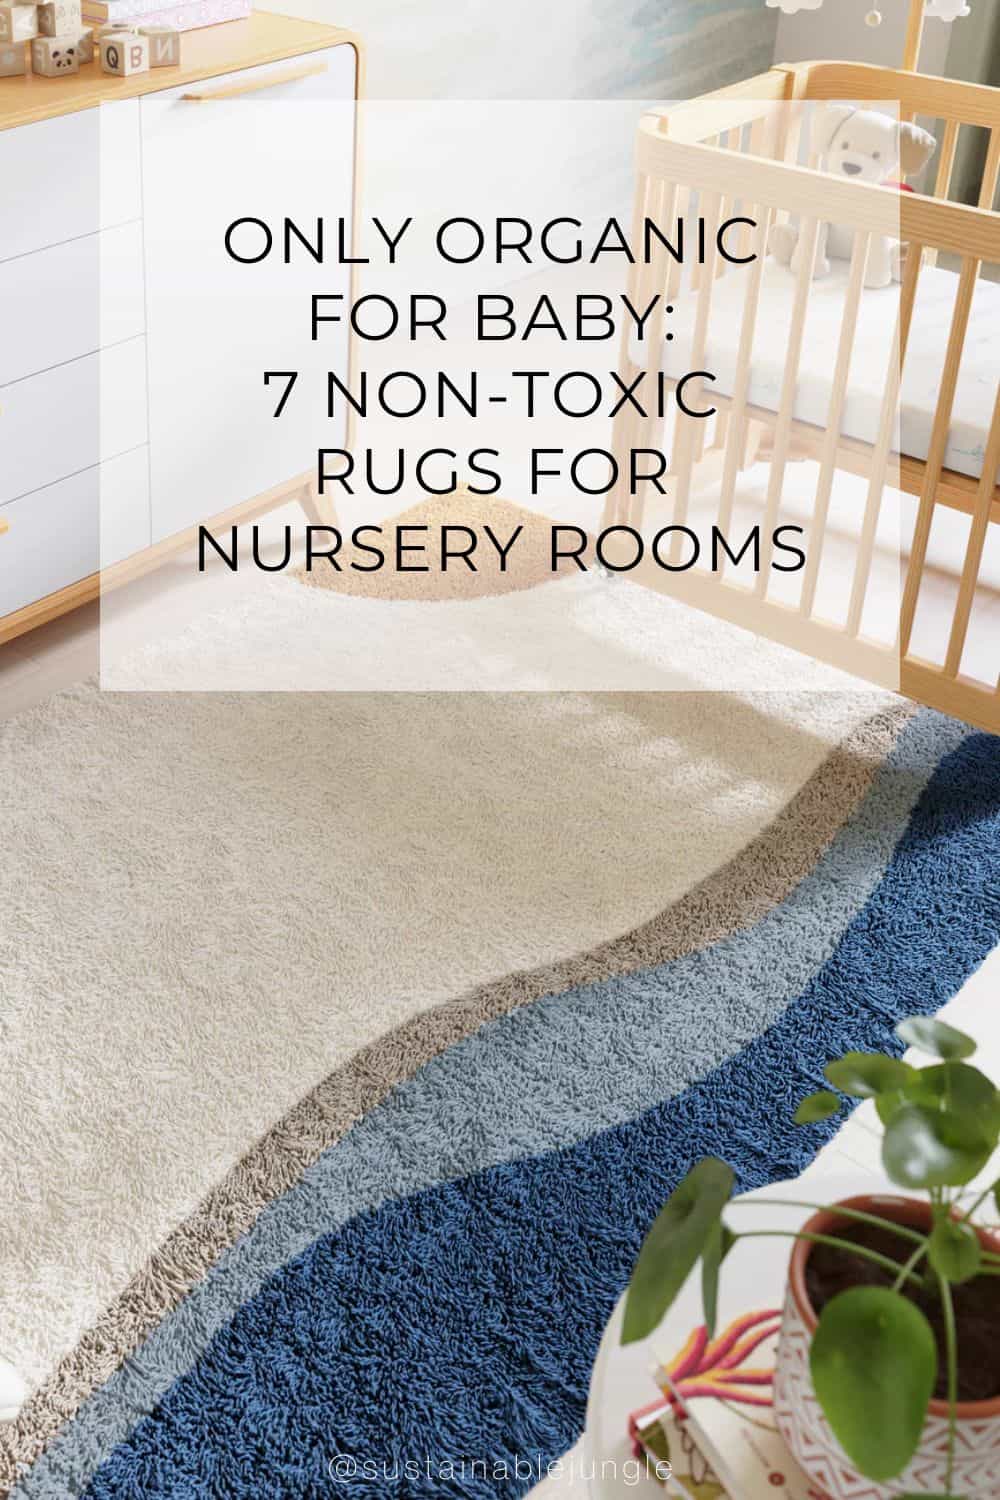 Only Organic For Baby: 7 Non-Toxic Rugs For Nursery Rooms Image by Nestig #nontoxicrugsfornursury #nontoxicnursuryrugs #nontoxicbabyrugs #organicnursuryrugs #nontoxicrugsforbaby #sustainablejungle